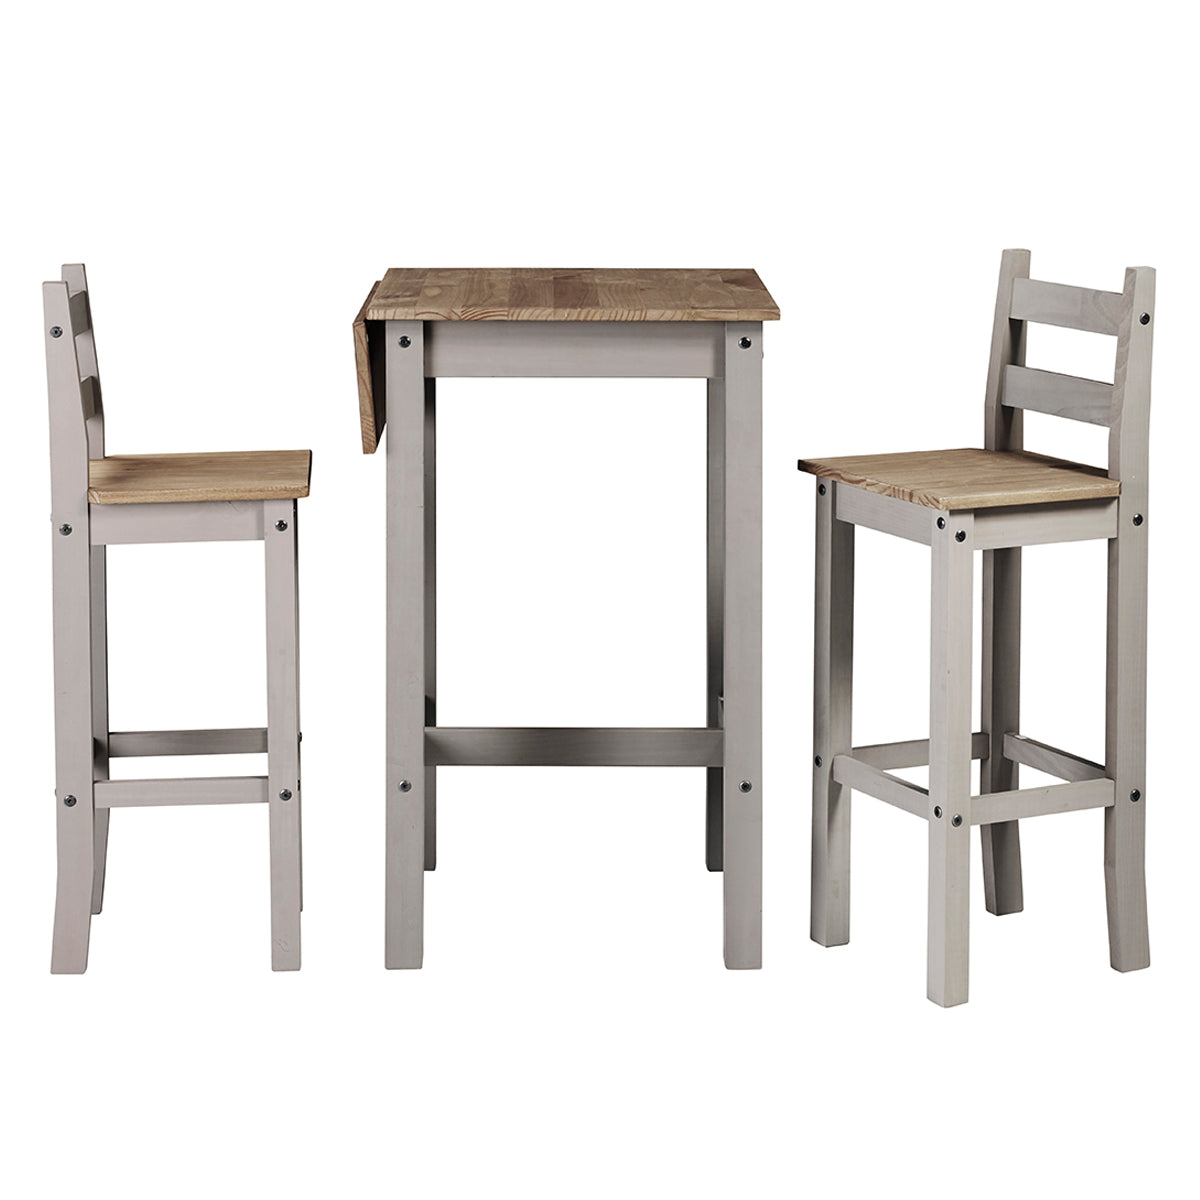 Wood Bar Height Dining Set of Drop Leaf Table and 2 Chairs Corona Gray | Furniture Dash